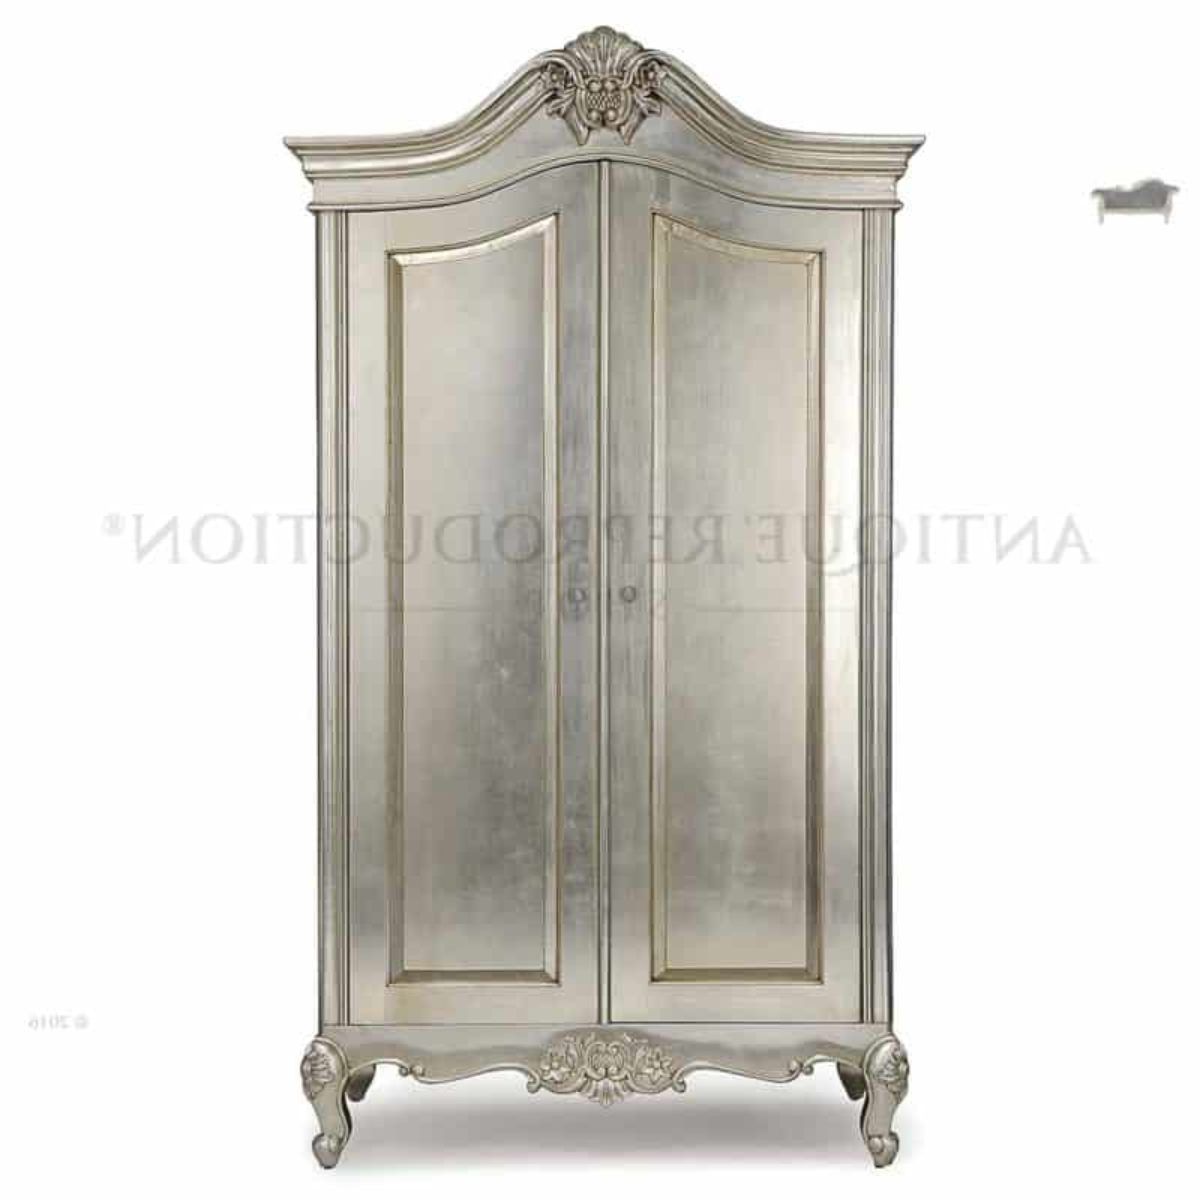 French Provincial Antique Armoire Wardrobe Cupboard Silver – Antique  Reproduction Shop Intended For French Armoires Wardrobes (View 18 of 20)